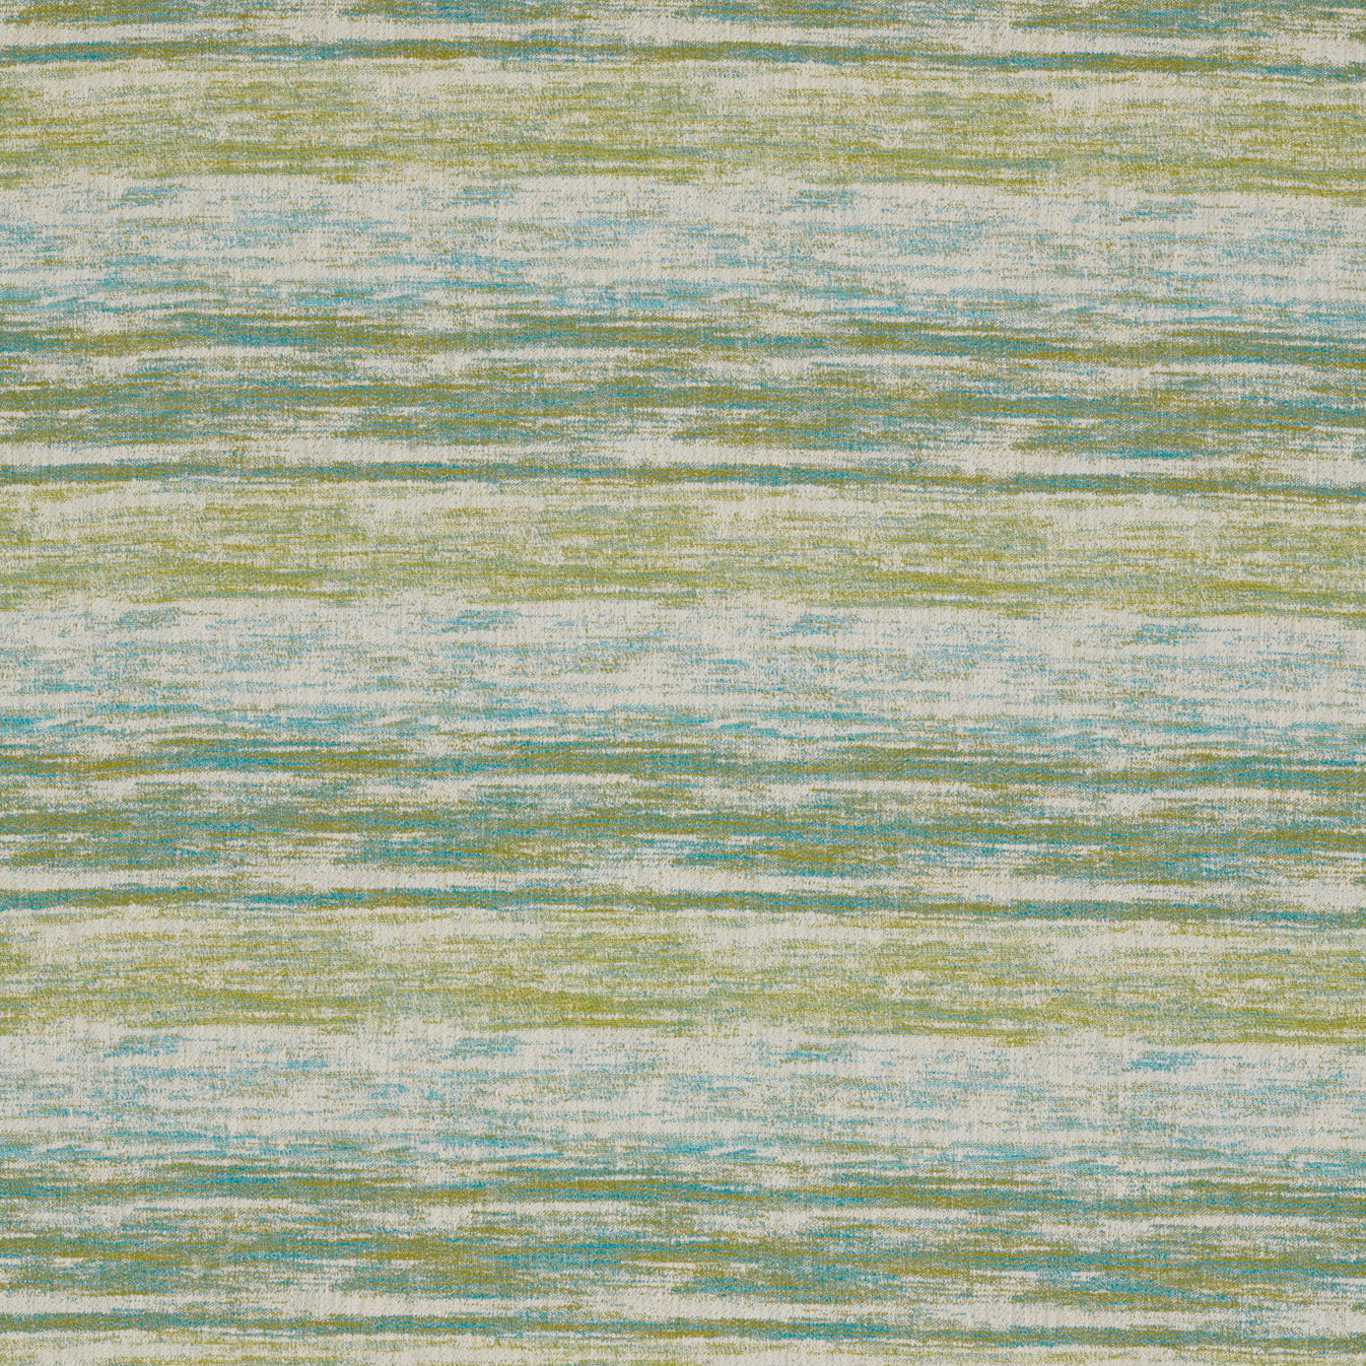 Strato Fabric by Harlequin